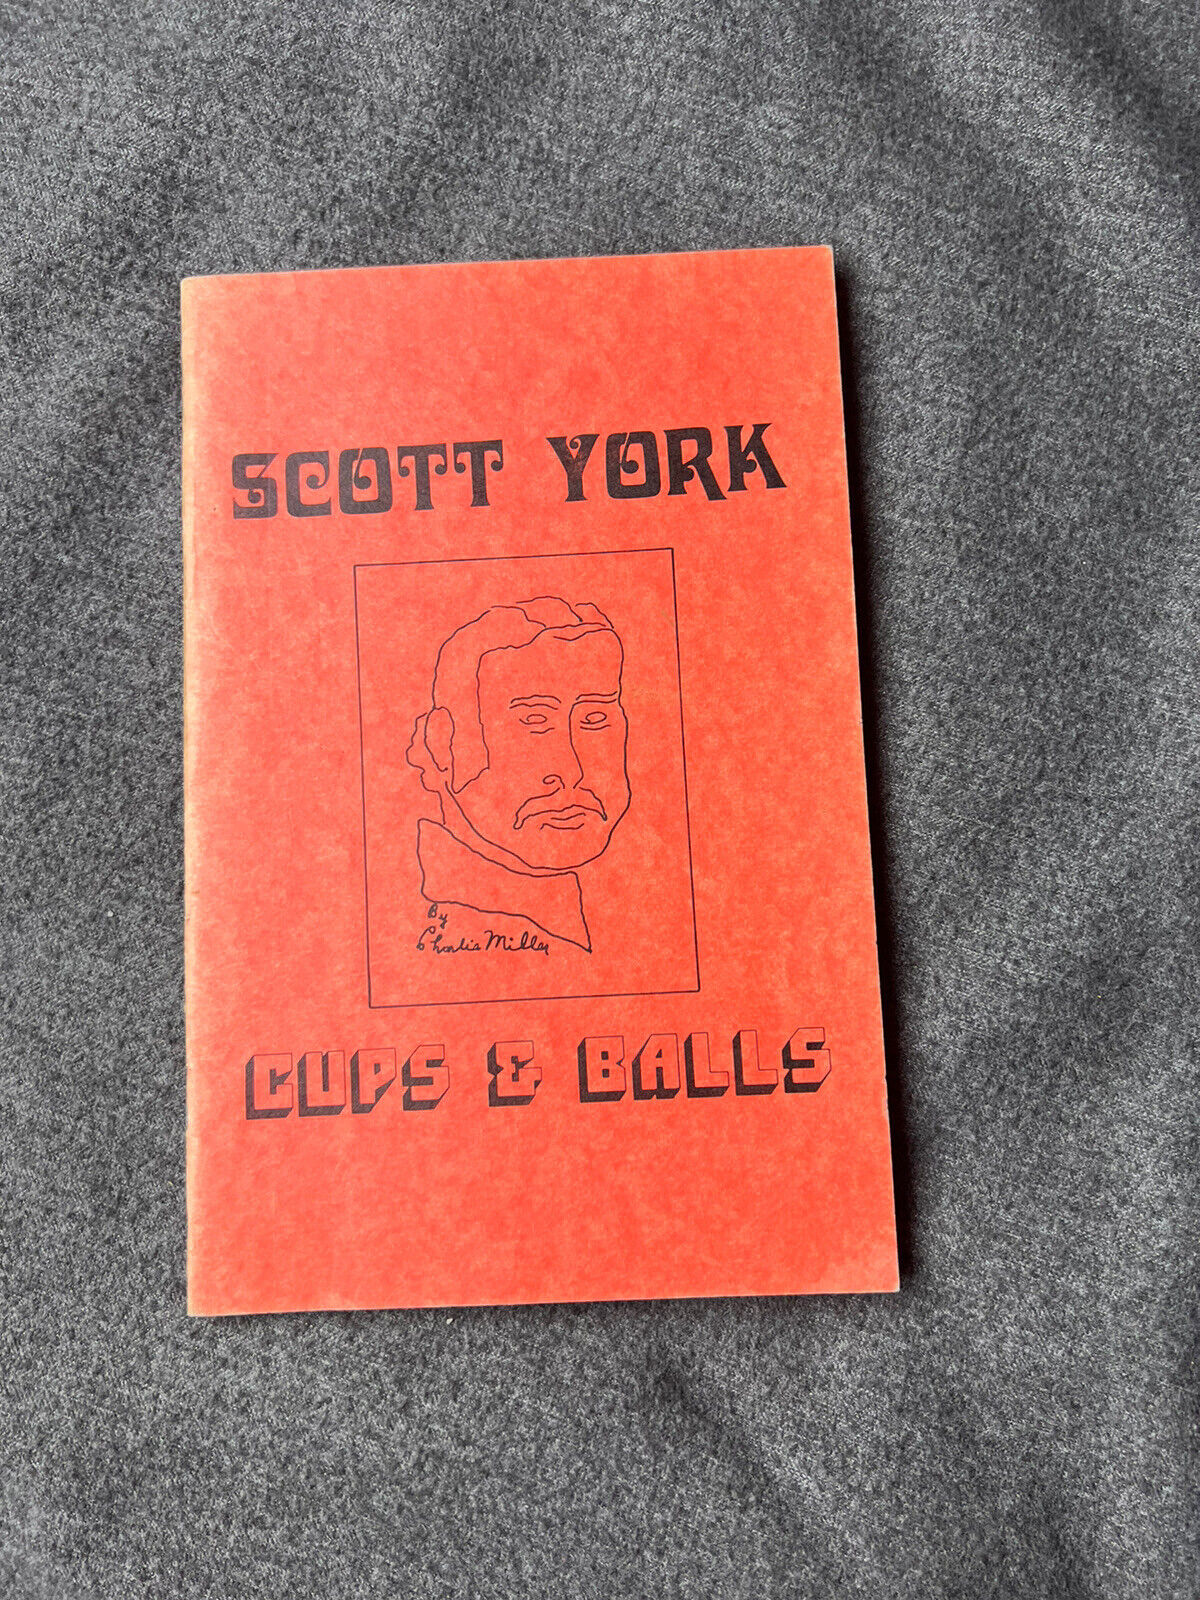 🔥￼￼￼ RARE ￼Out Of Print Scotty York Cups And Balls Routine Manuscript🔥🔥